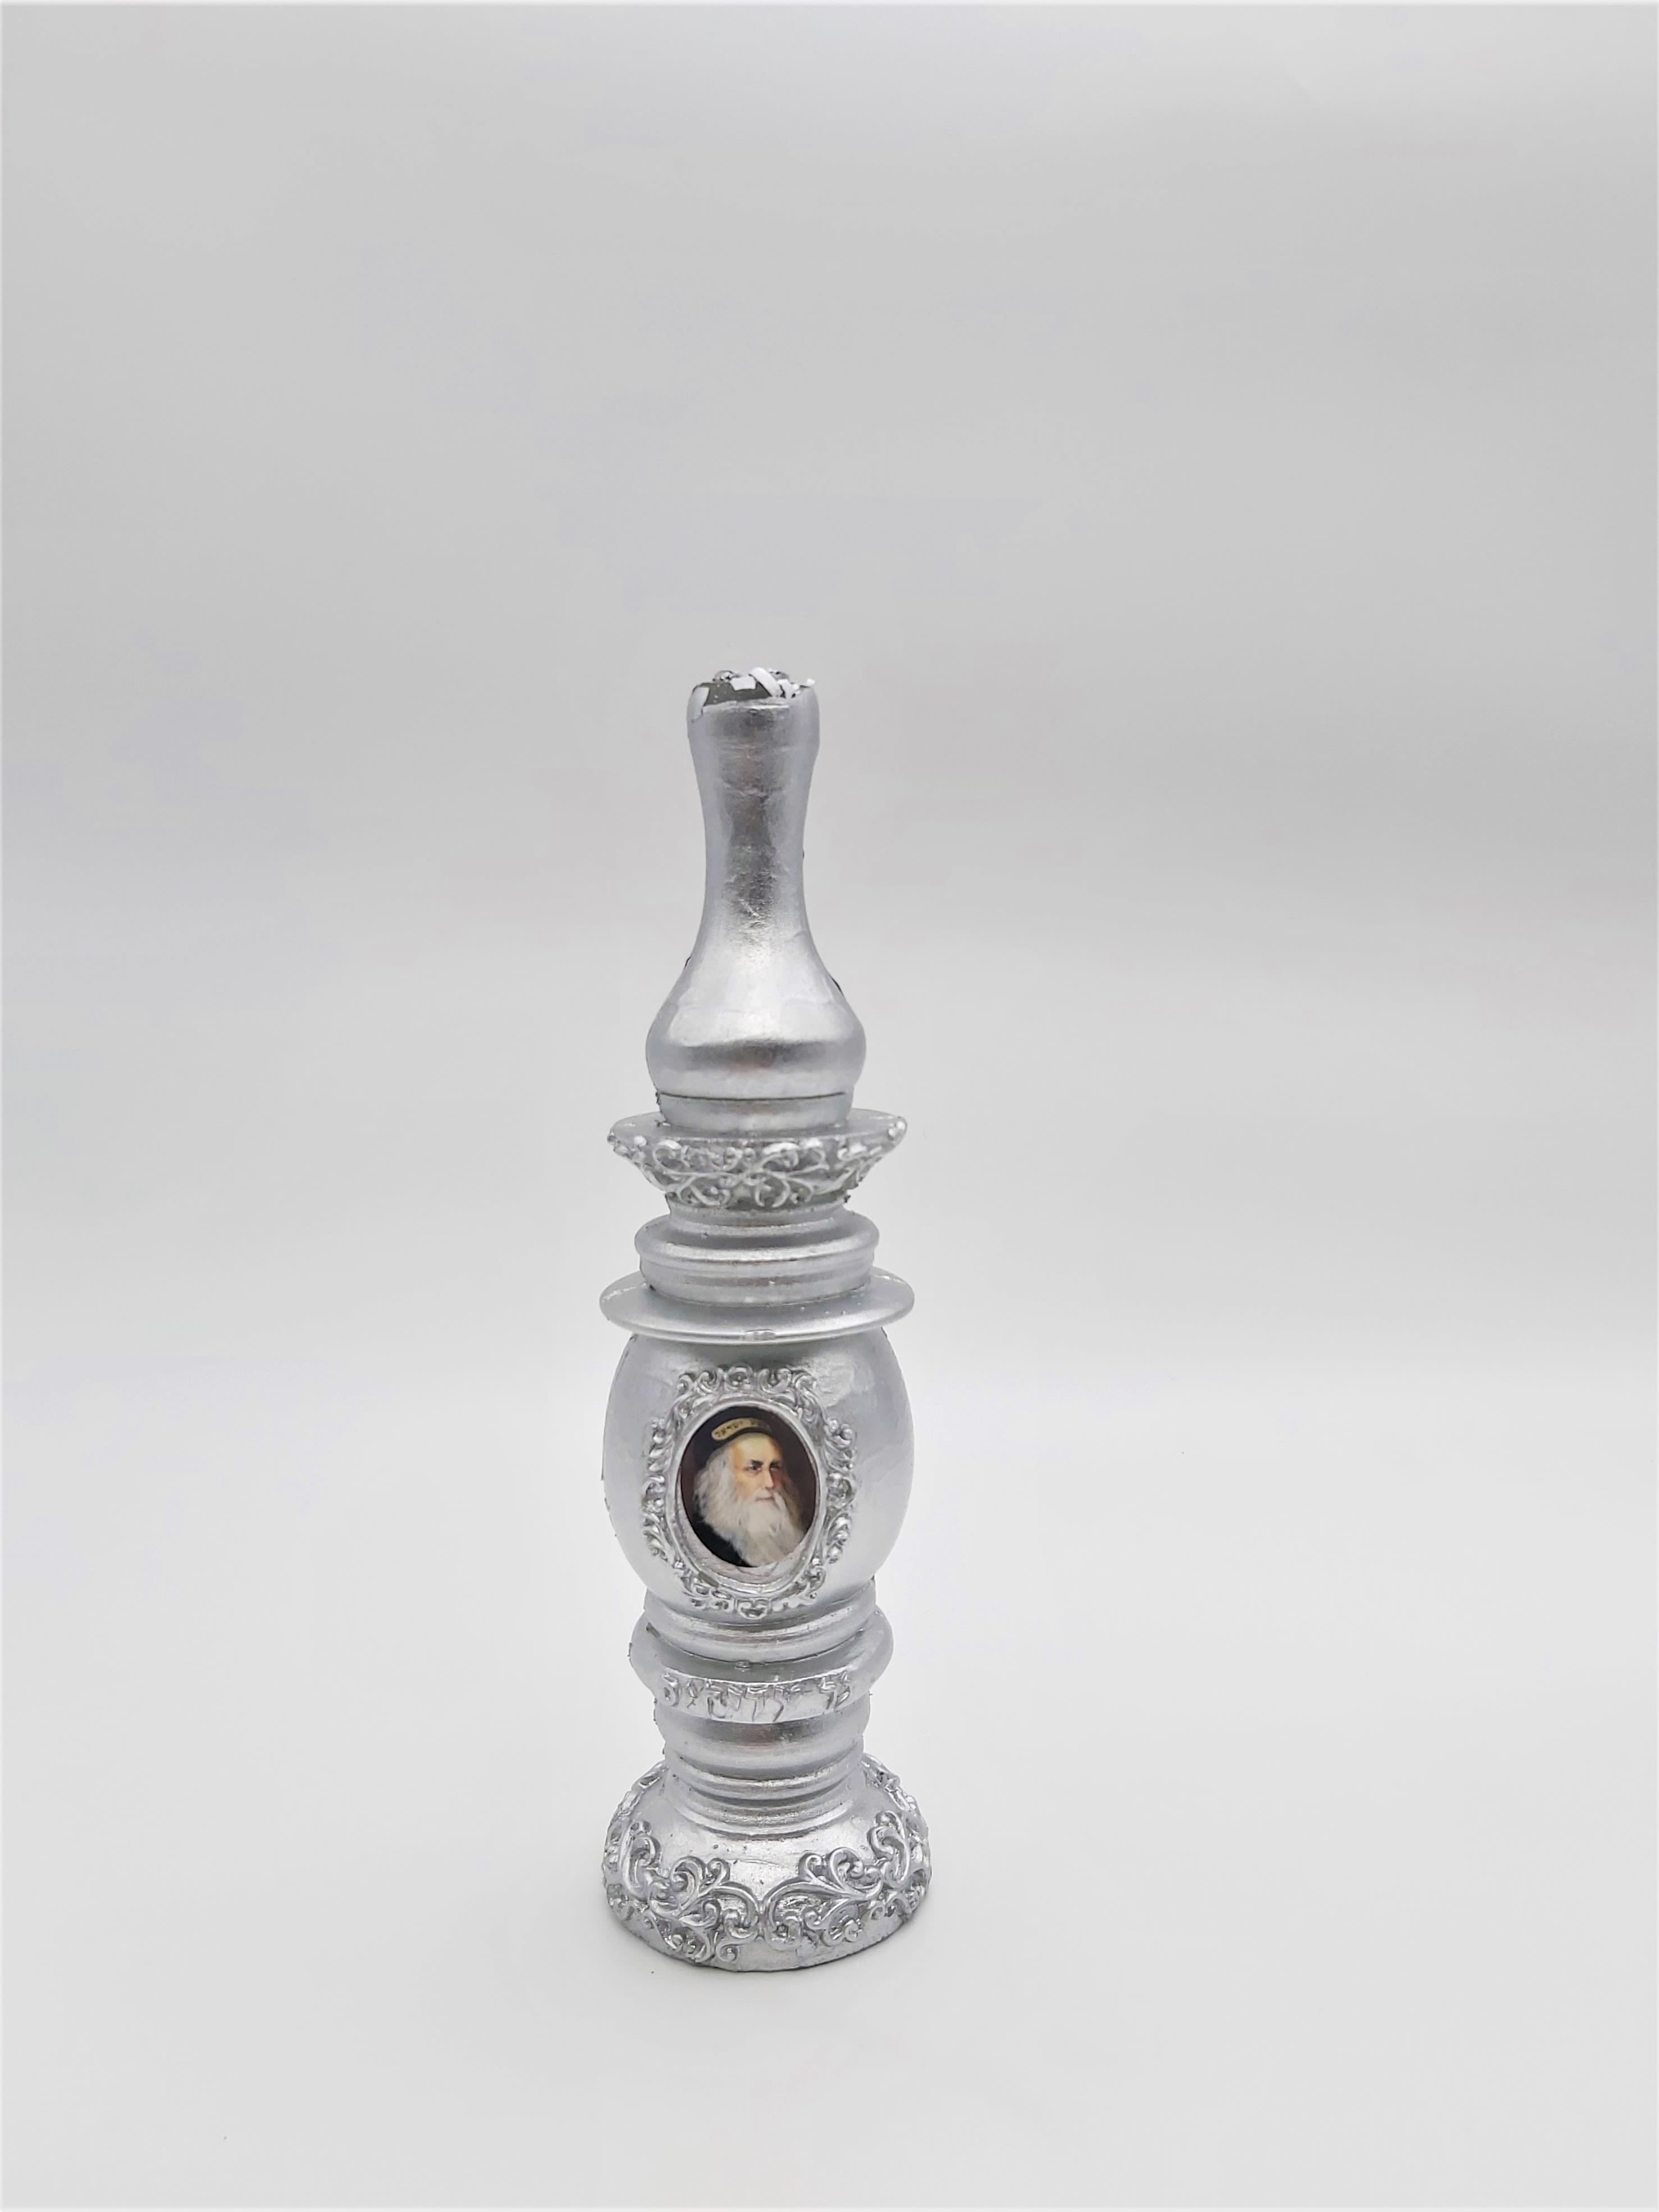 Lamp-Shaped, Silver-Colored Havdalah Candle with Picture of Rashbi